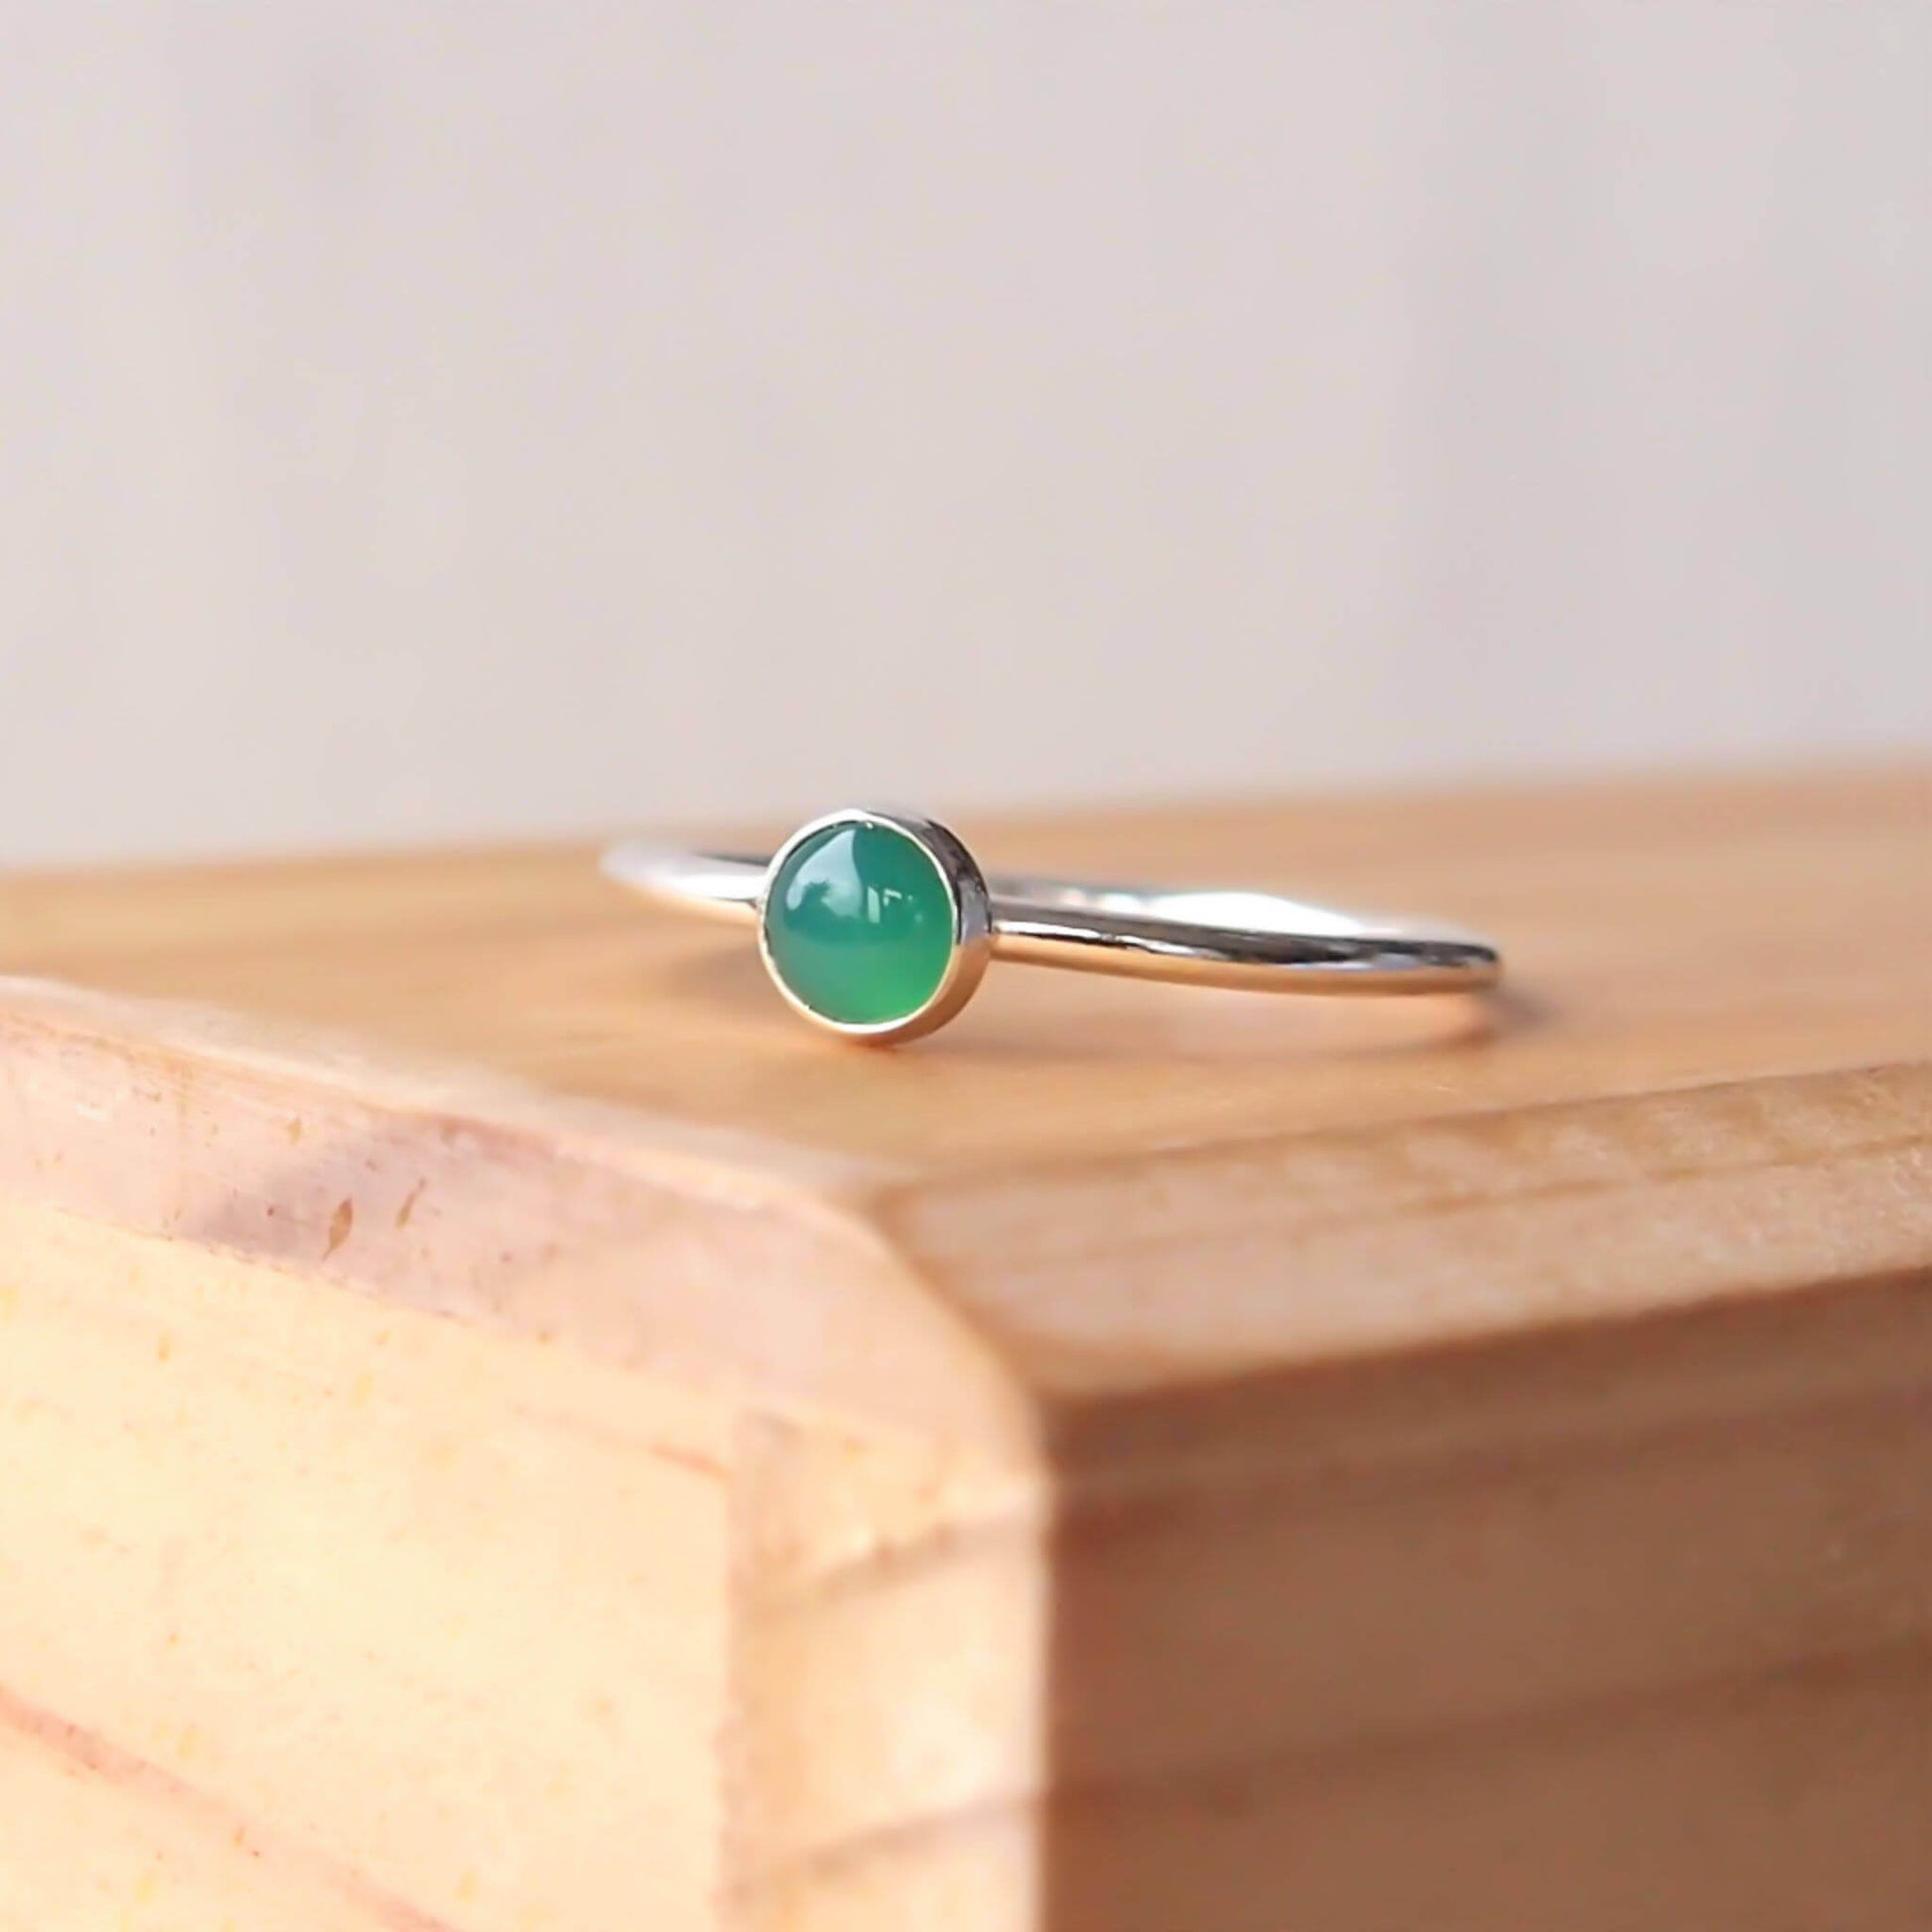 Green Agate Ring. A 5mm round cabochon emerald Green Agate, birthstone for May  set very simply onto a round band of sterling silver. handmade by maram jewellery in Scotland